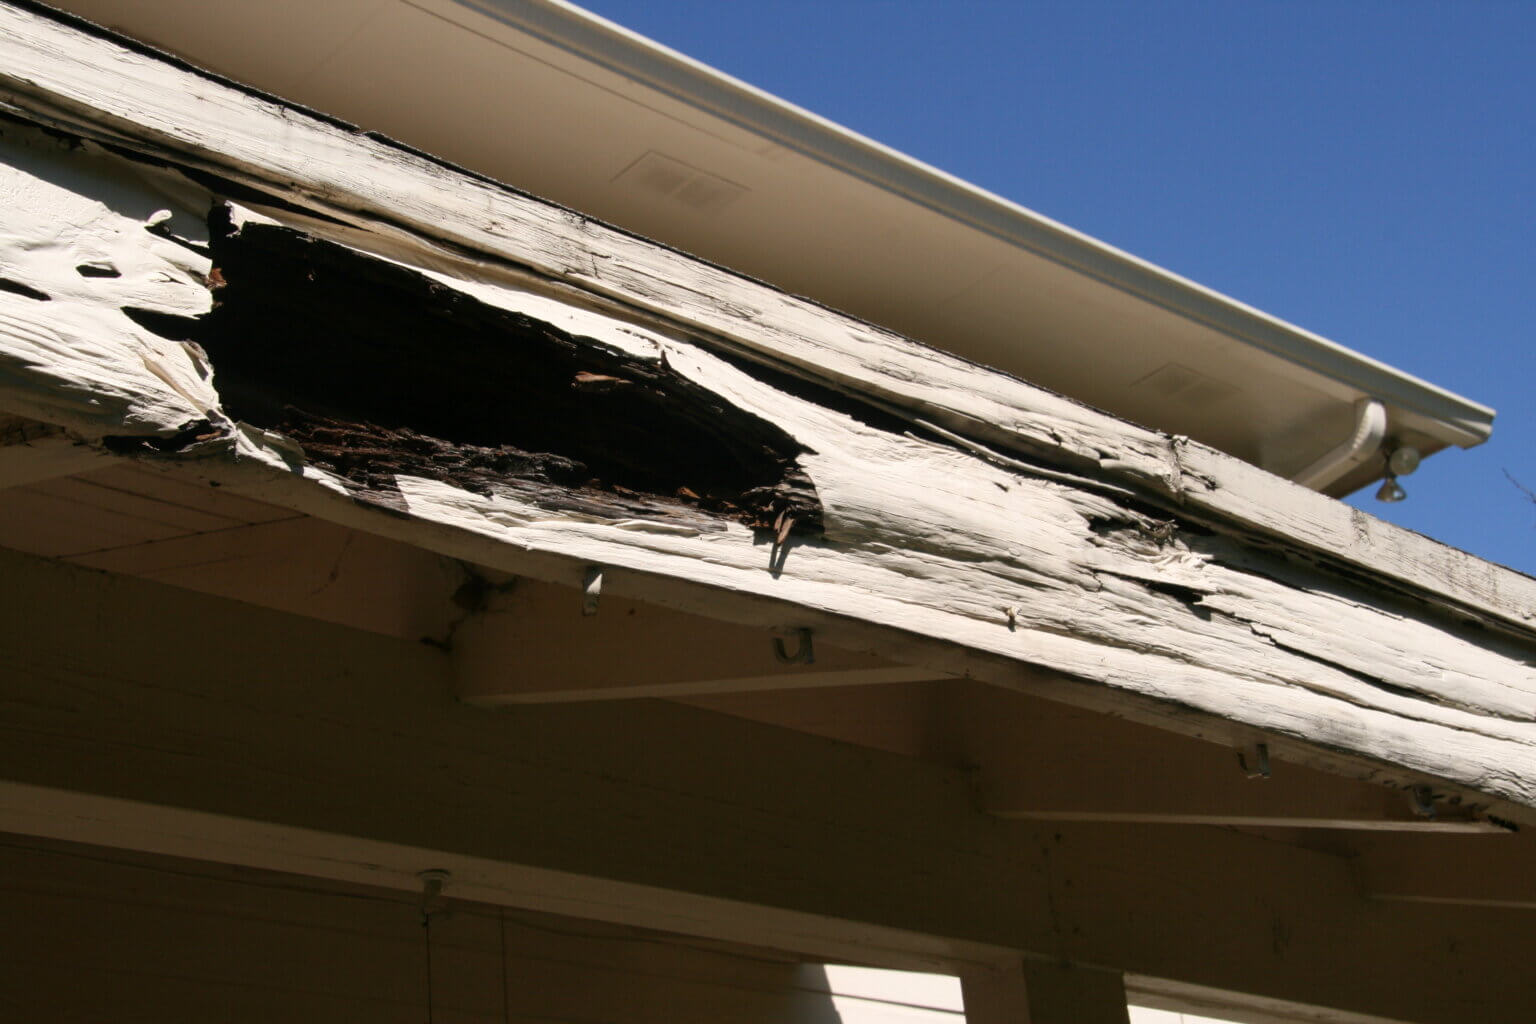 Problems With Doors, Windows And Roofs: What Causes Wood Rot?